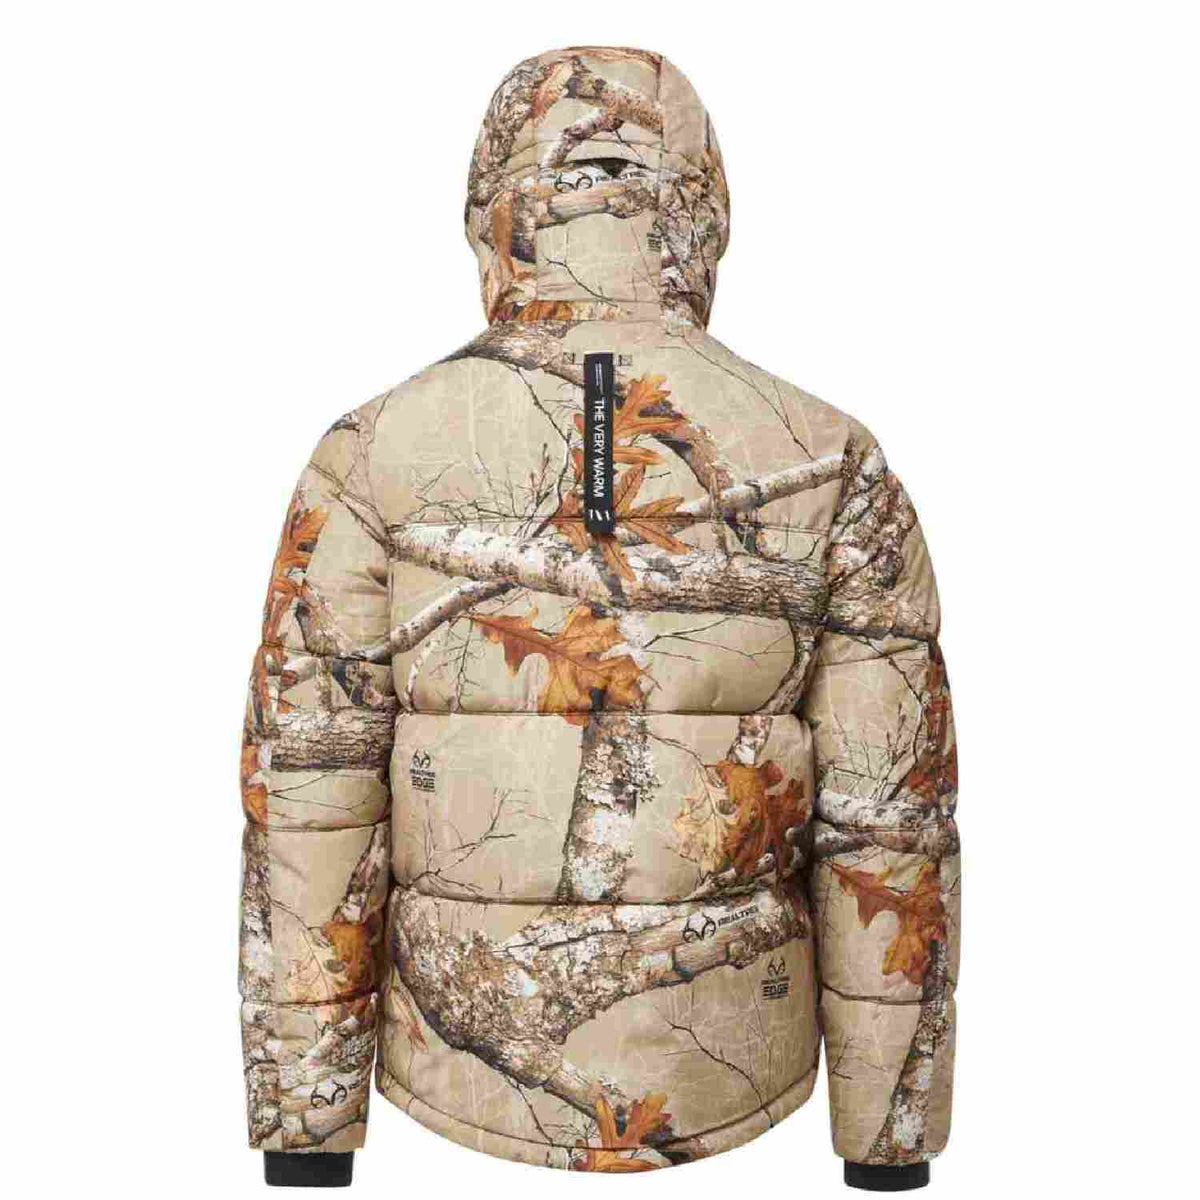 The Very Warm - Desert Poly Filled Puffer Jacket